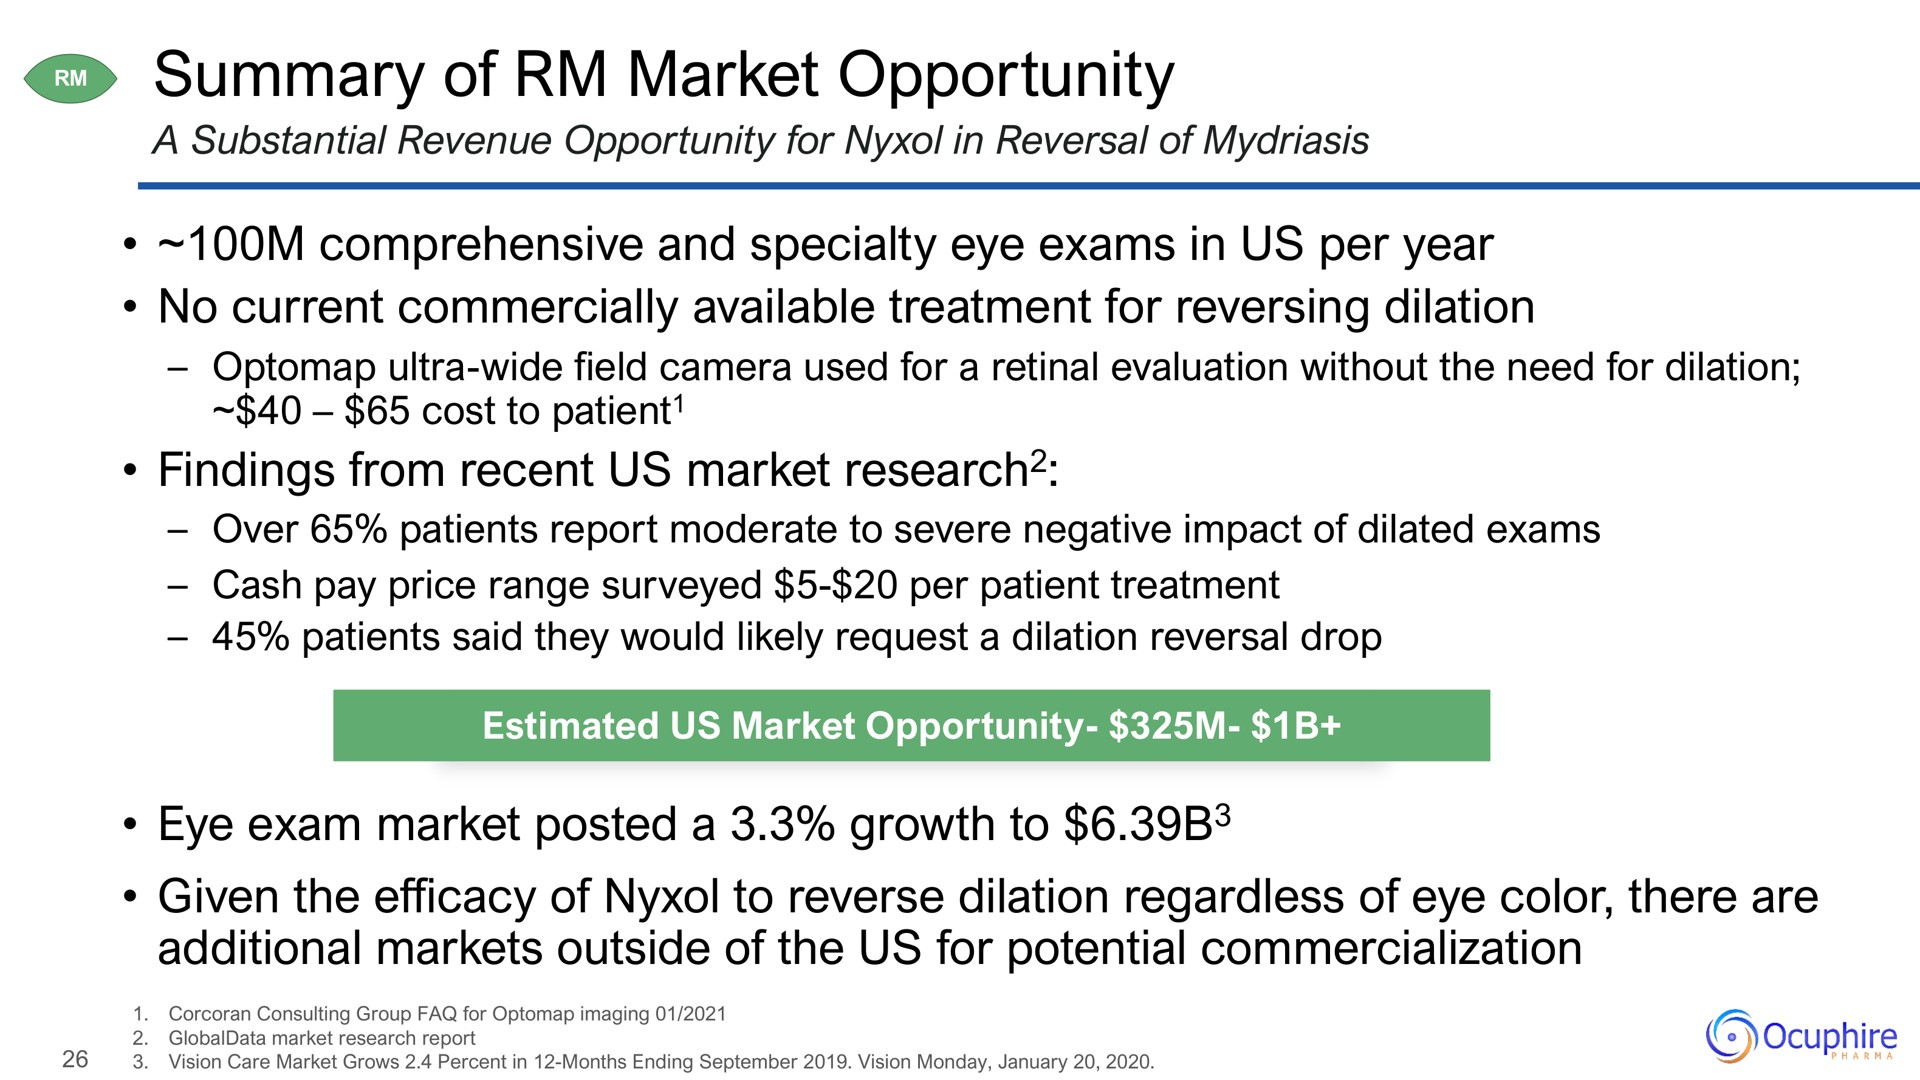 summary of market opportunity comprehensive and specialty eye exams in us per year no current commercially available treatment for reversing dilation findings from recent us market research eye exam market posted a growth to given the efficacy of to reverse dilation regardless of eye color there are additional markets outside of the us for potential commercialization | Ocuphire Pharma